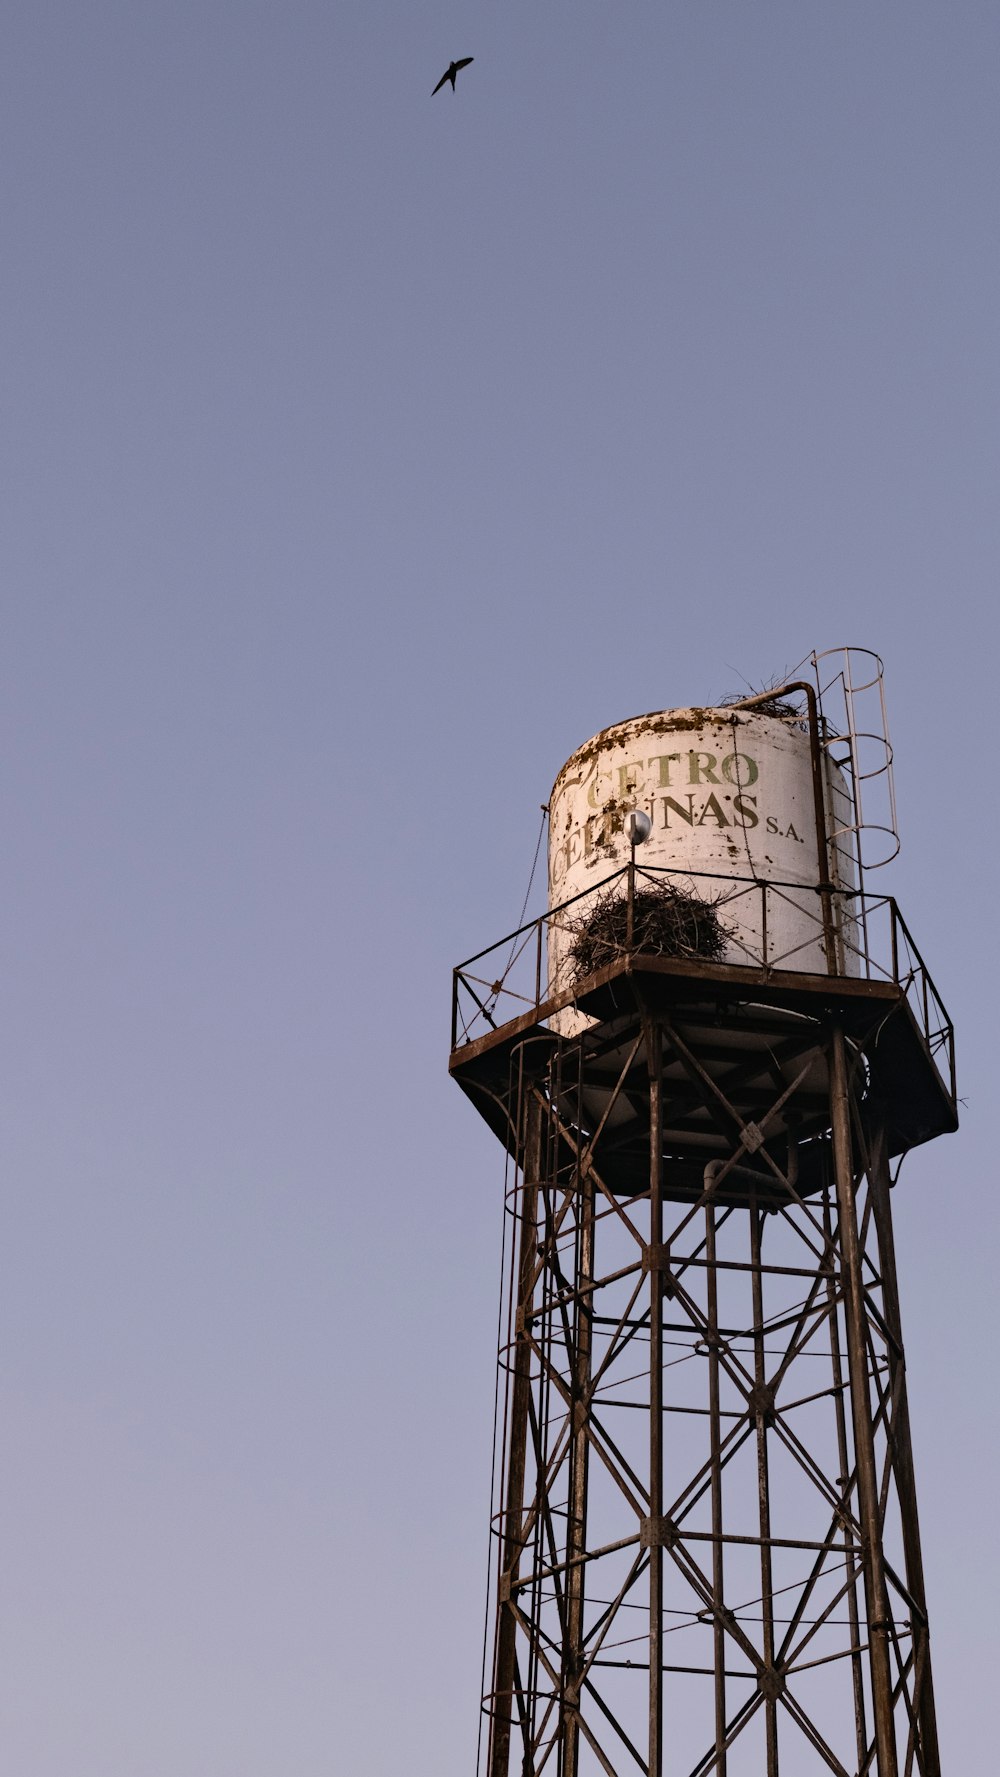 a bird flying over a water tower